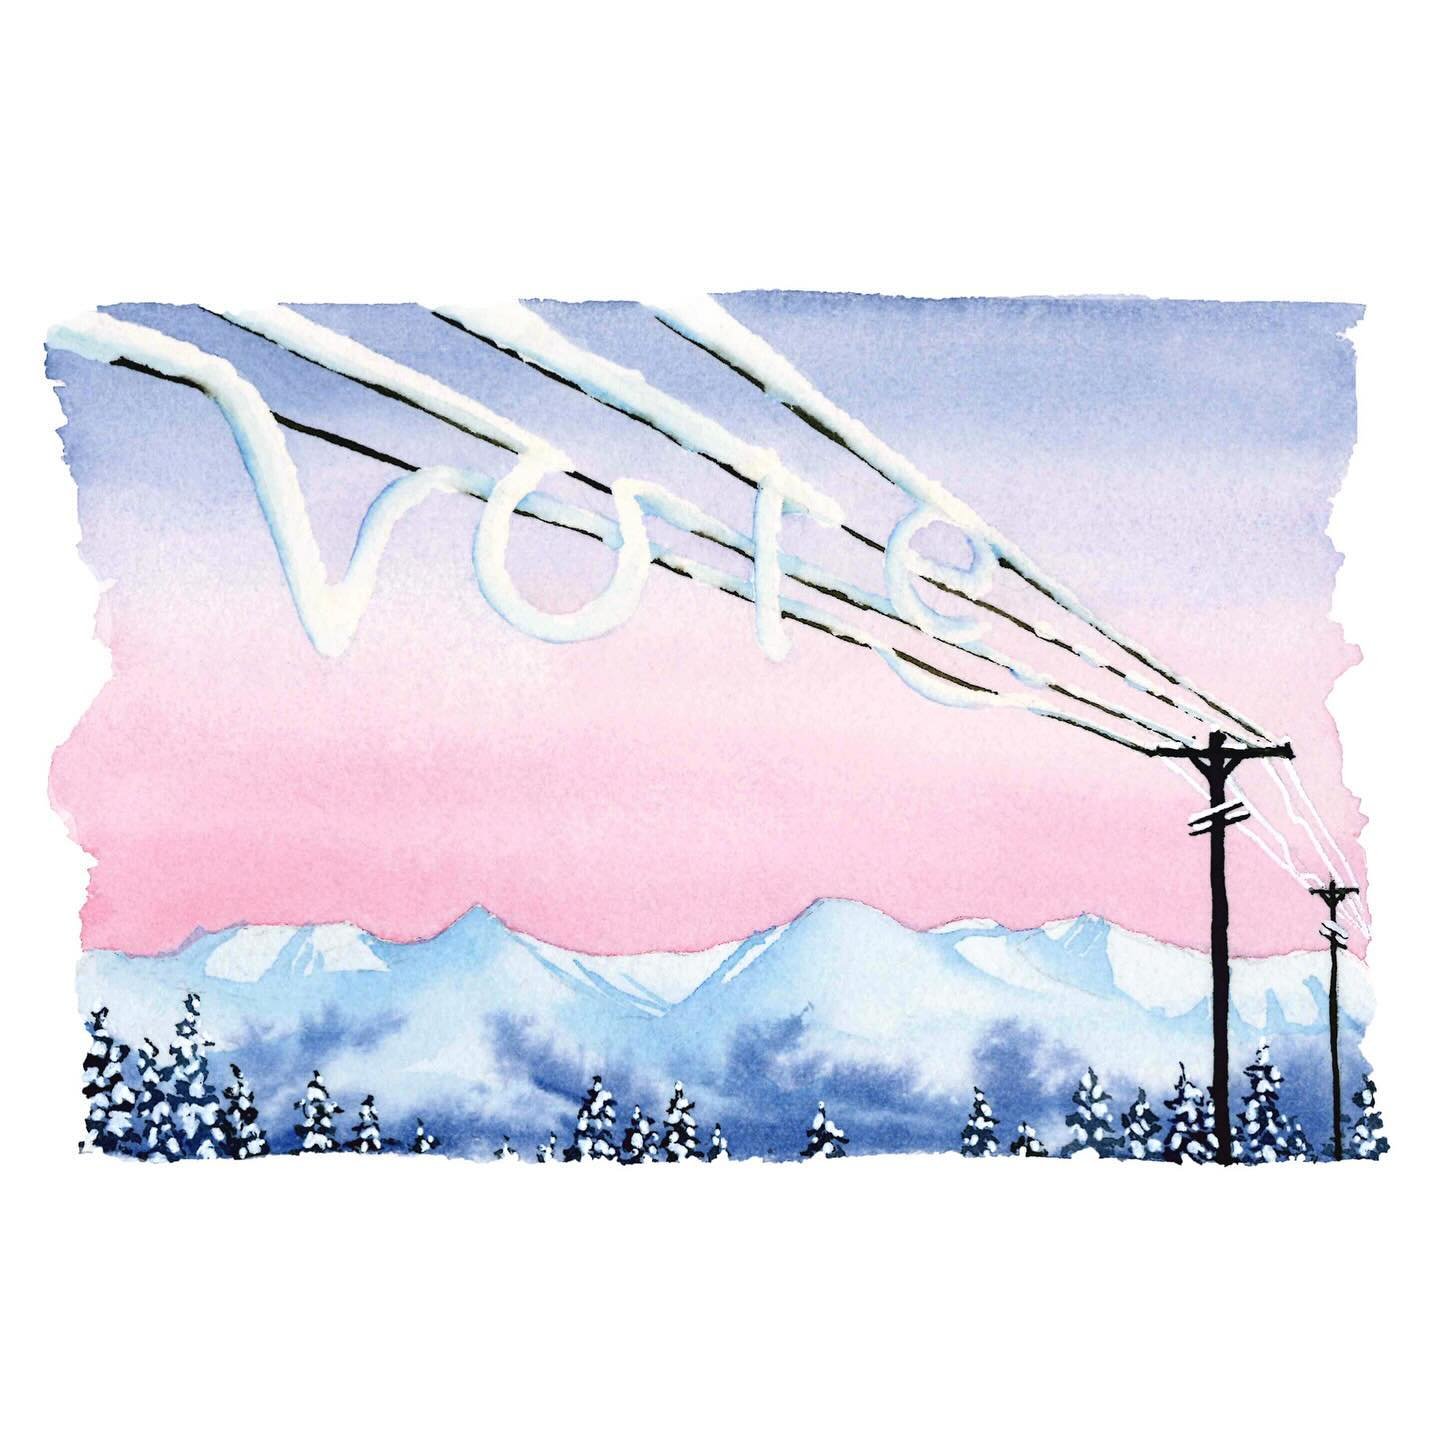 The power lines are trying to tell you something! 

If you (or someone you know) lives in Southcentral Alaska your electricity probably comes from Chugach Electric, who operates over 3000 miles of transmission lines that connect your home, workplaces